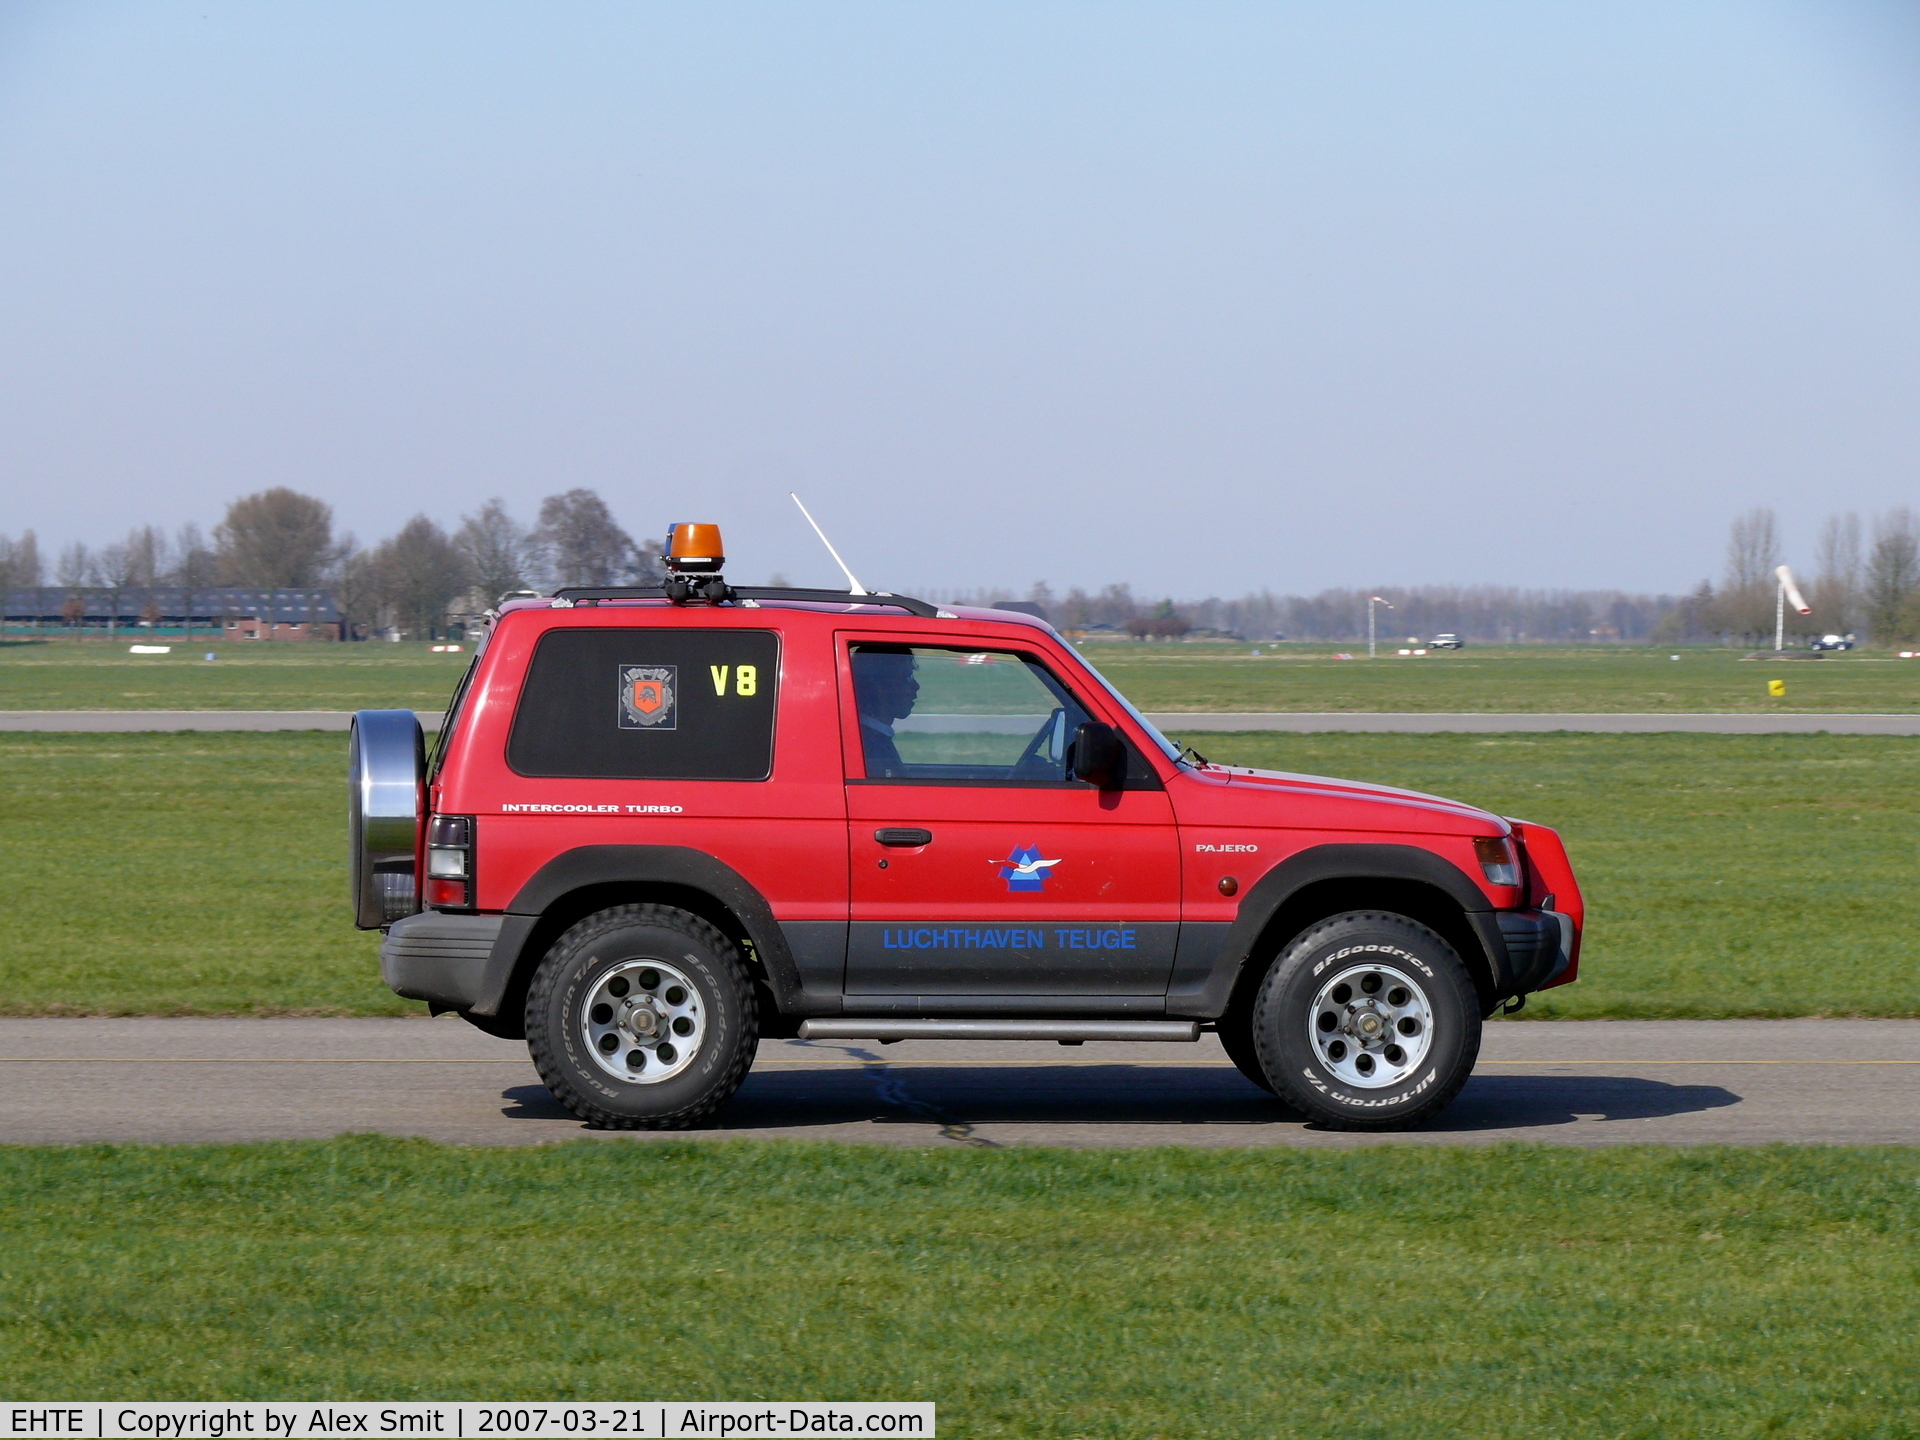 Teuge International Airport, Deventer Netherlands (EHTE) - Pajero of the CinC of the Teuge firedepartment